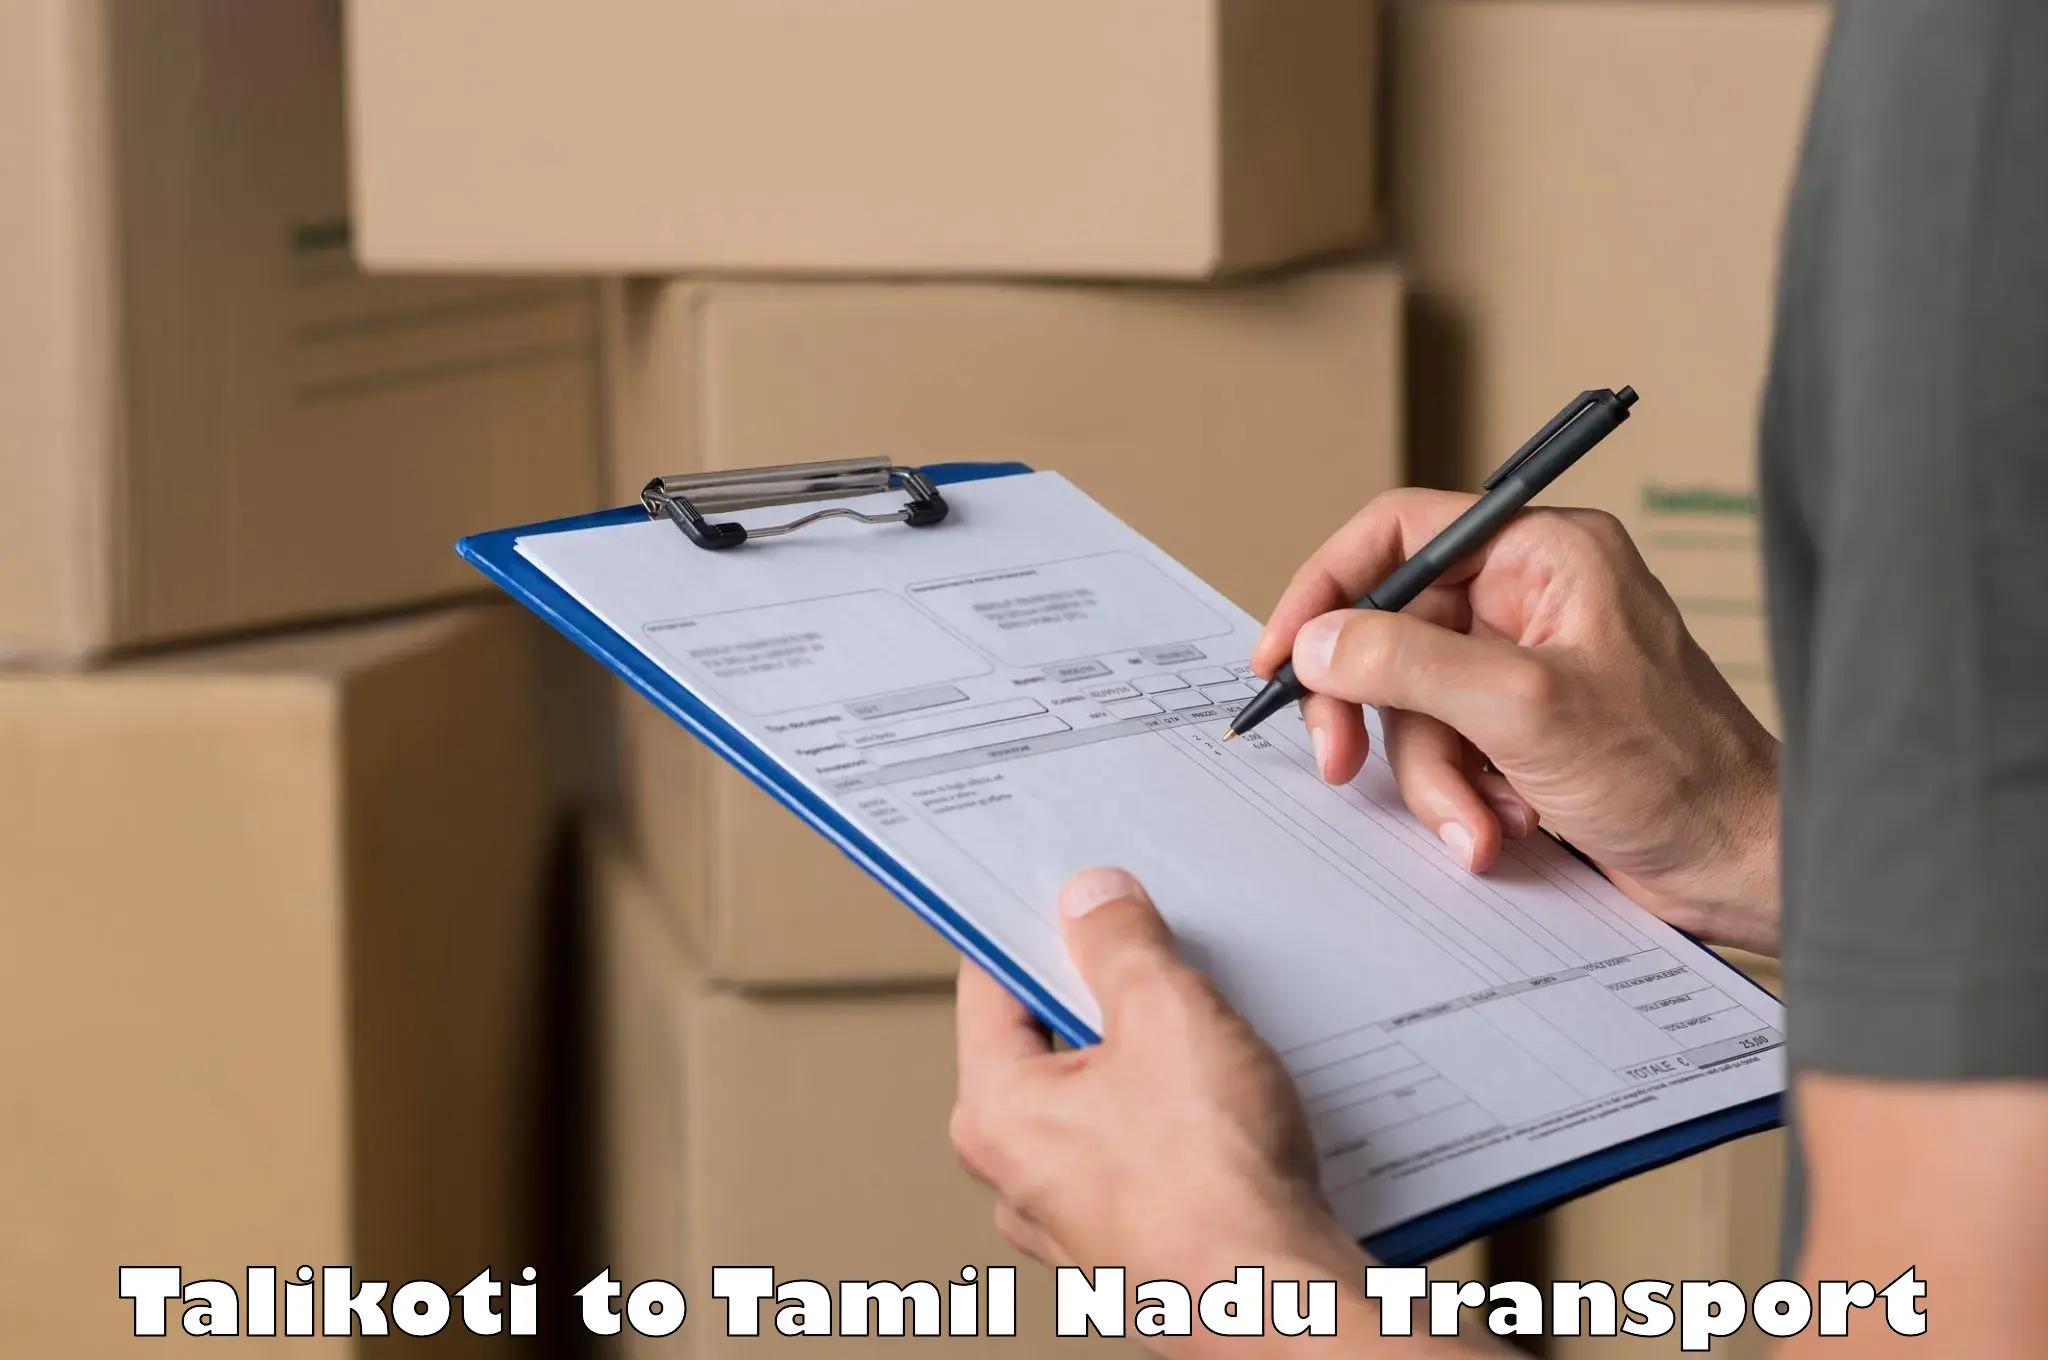 Inland transportation services Talikoti to Shanmugha Arts Science Technology and Research Academy Thanjavur